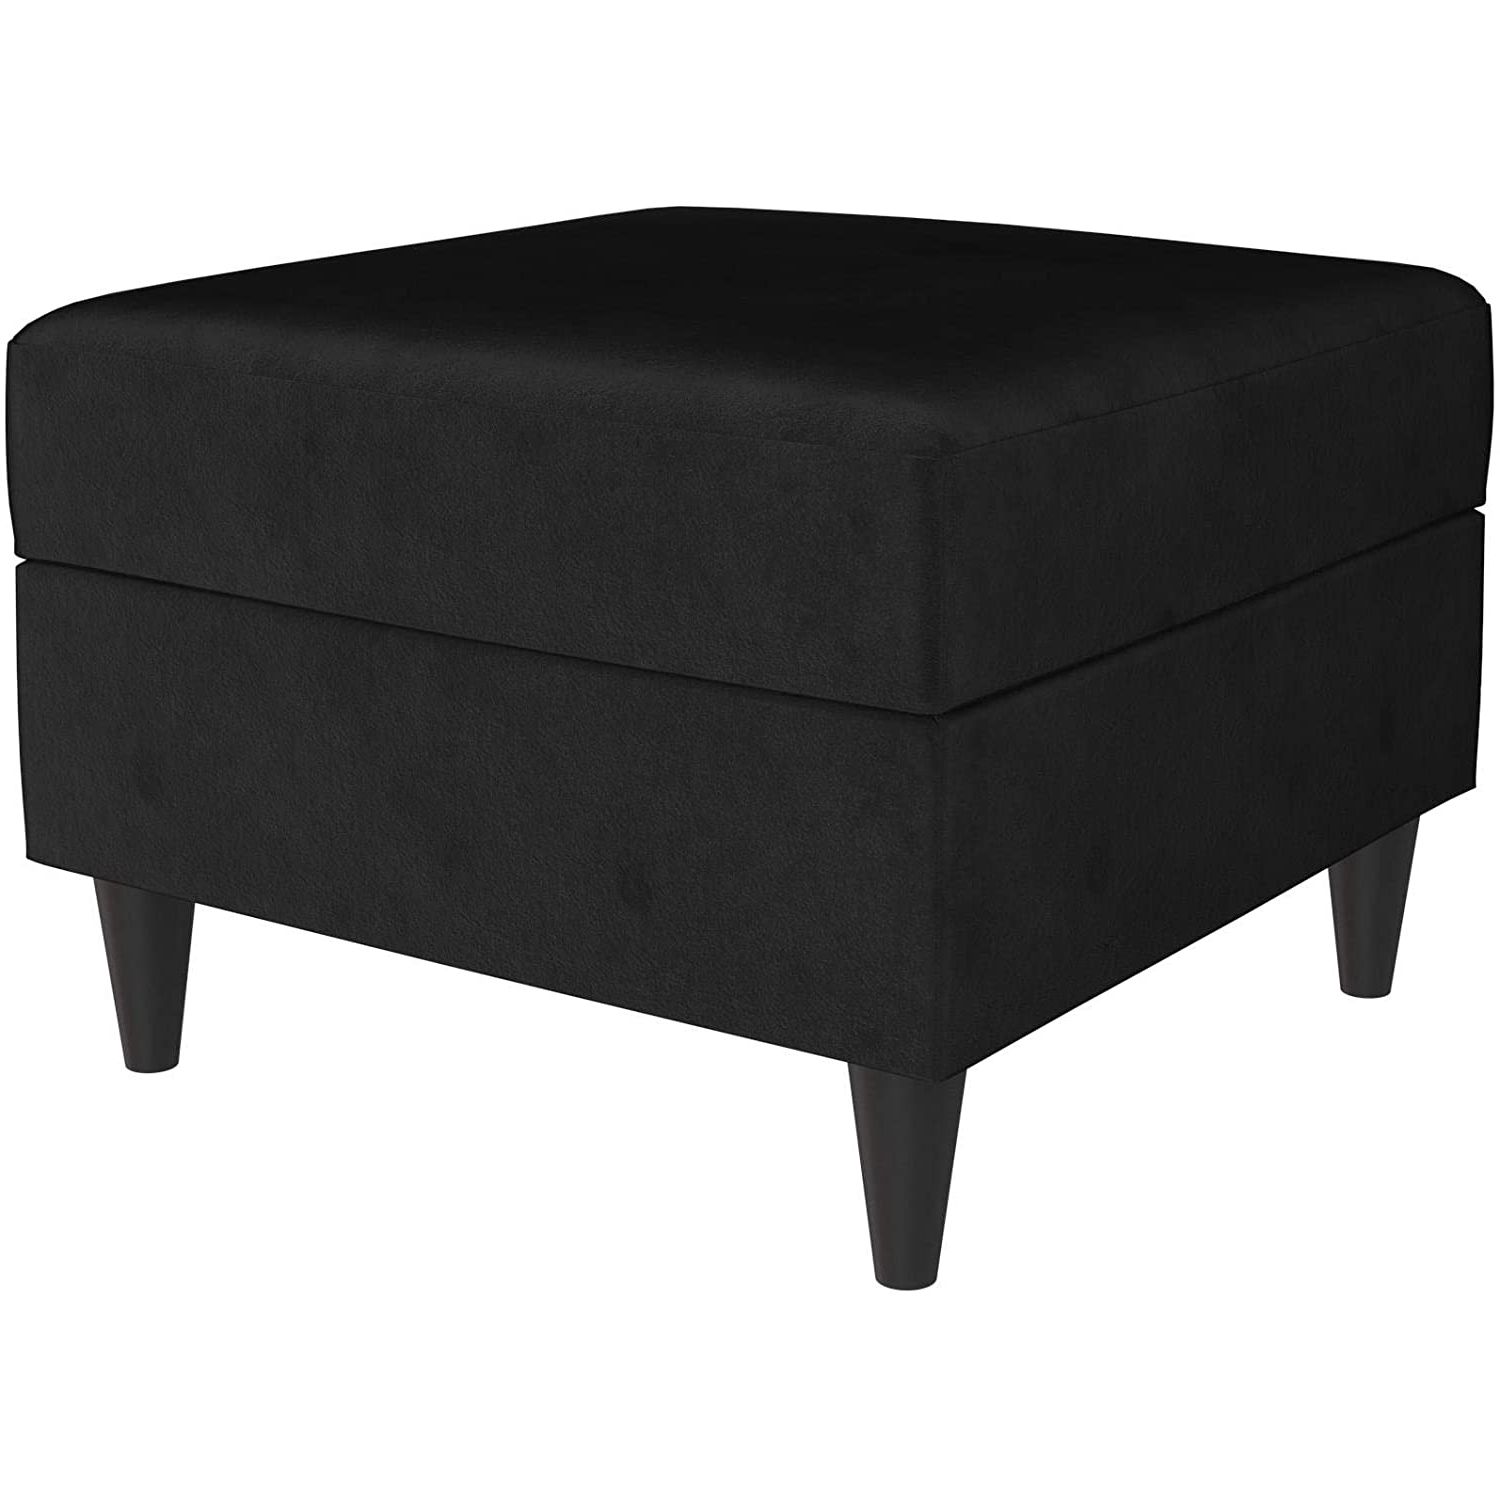 Black And Ivory Solid Cube Pouf Ottomans Inside Favorite Amazon: Contemporary Cooper Small Square Ottoman With Storage (View 2 of 10)